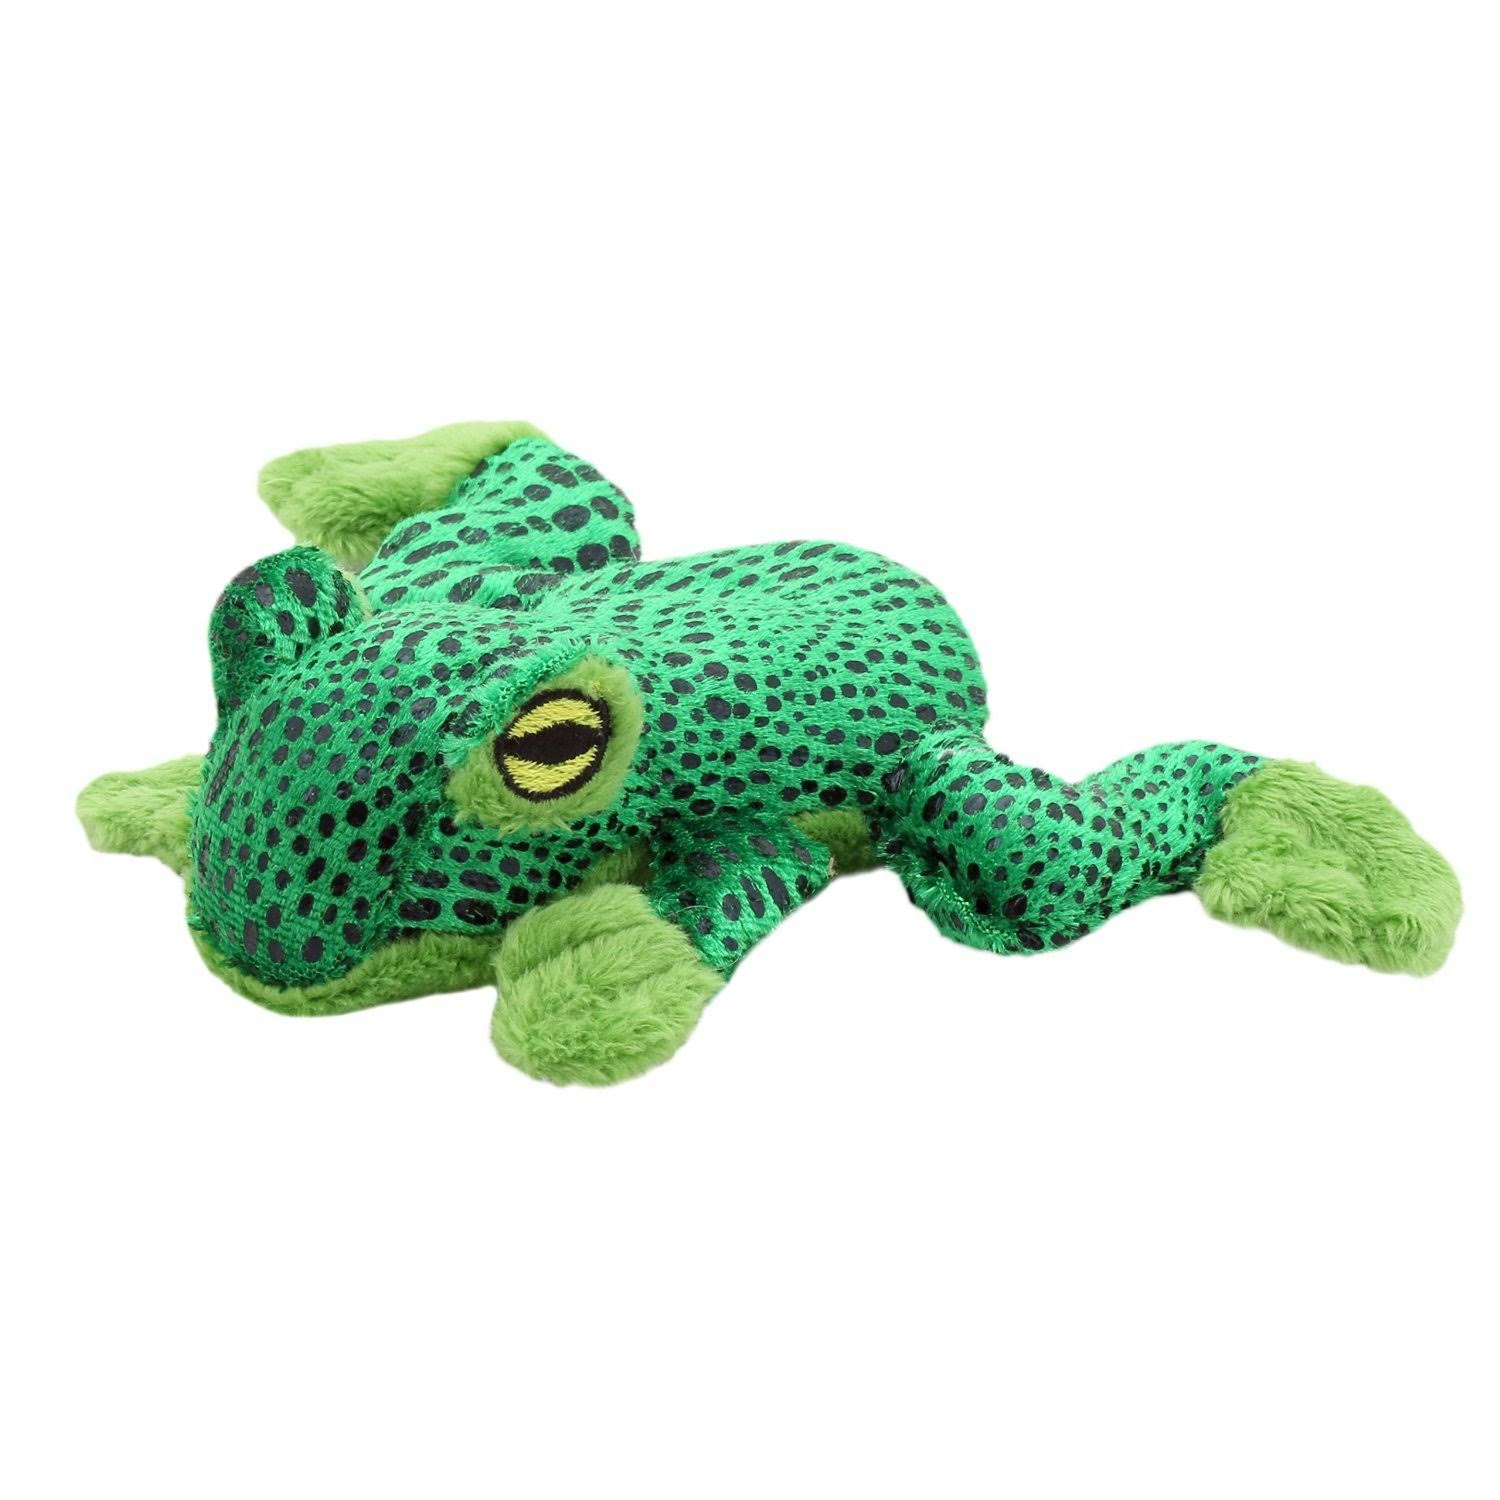 The Puppet Company Finger Puppet Soft Plush Toy - Swimming Frog